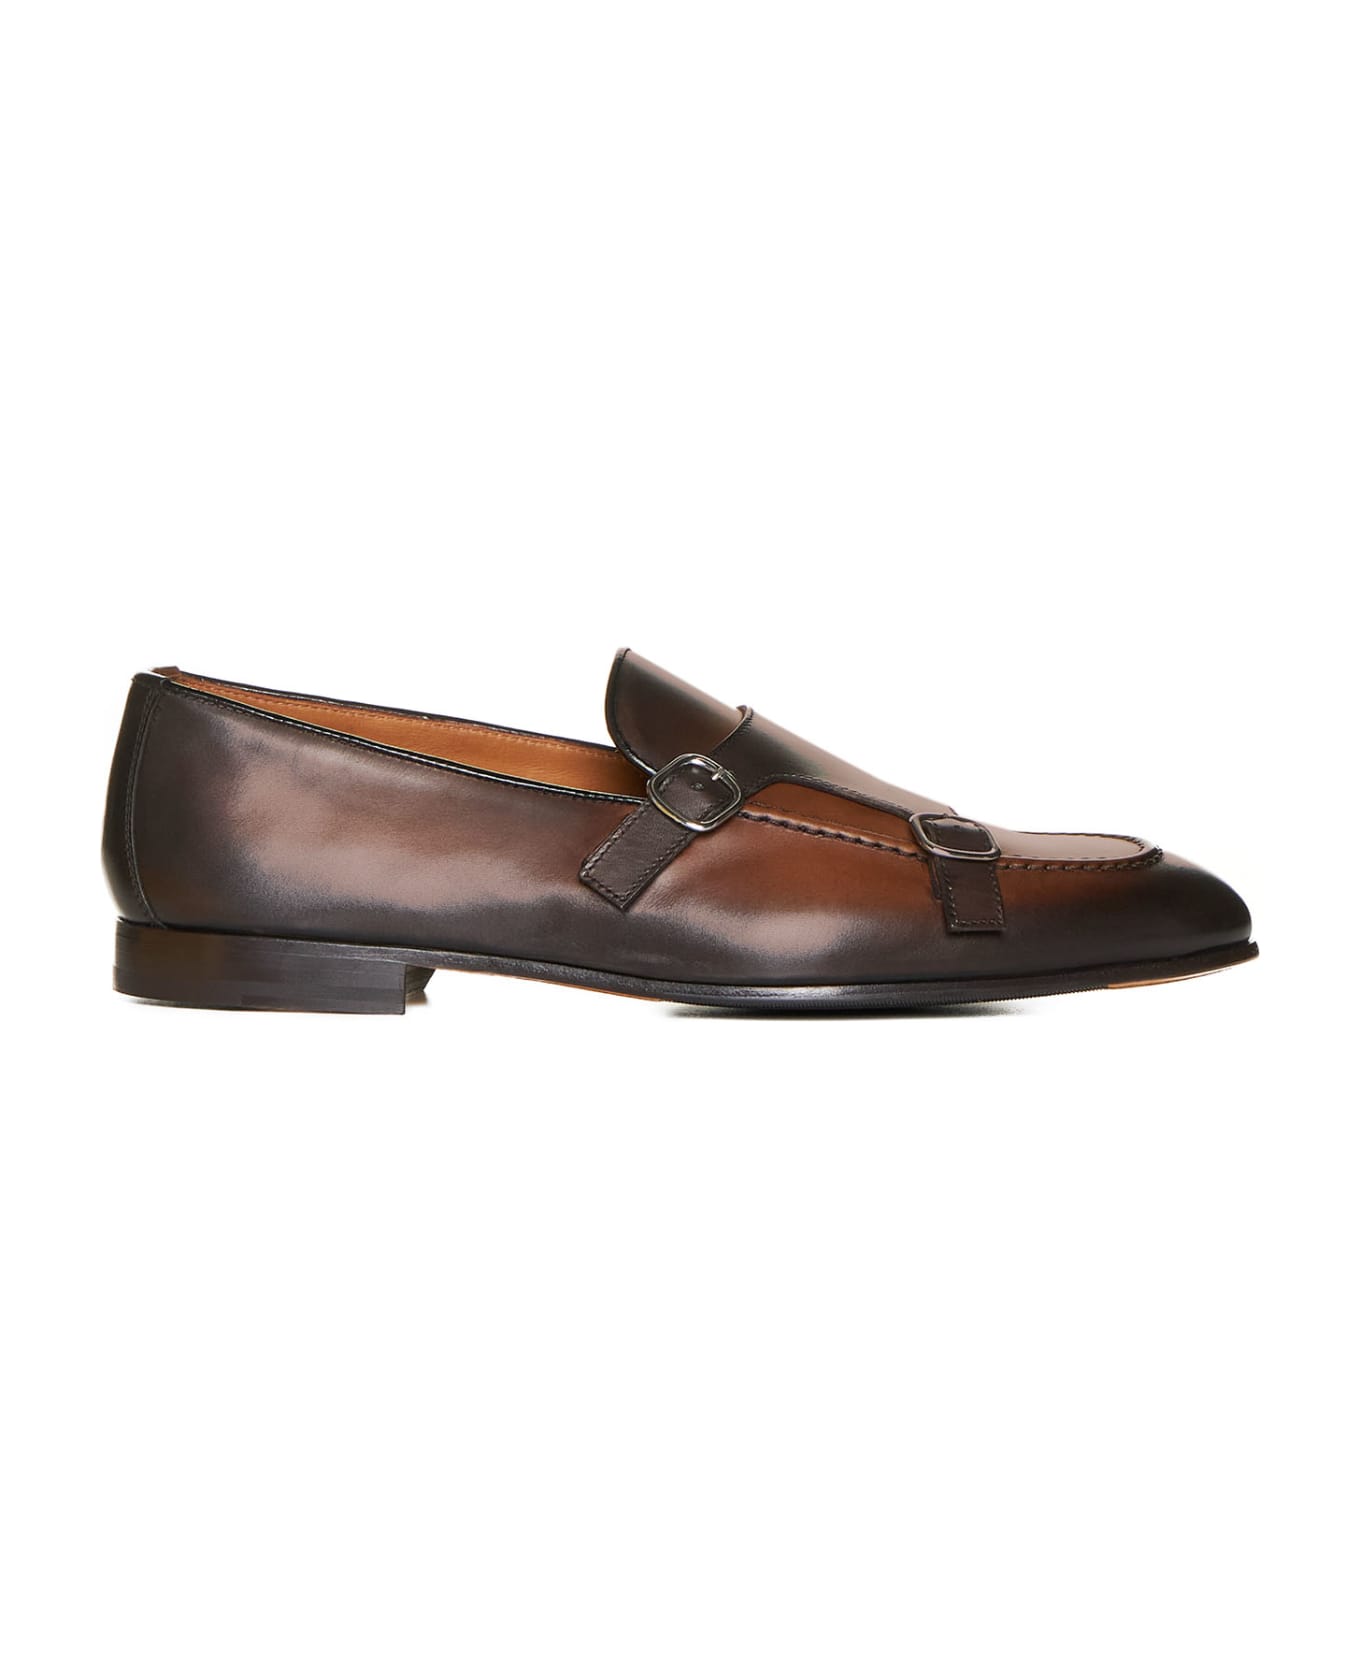 Doucal's Loafers - Wood + f.do t.moro